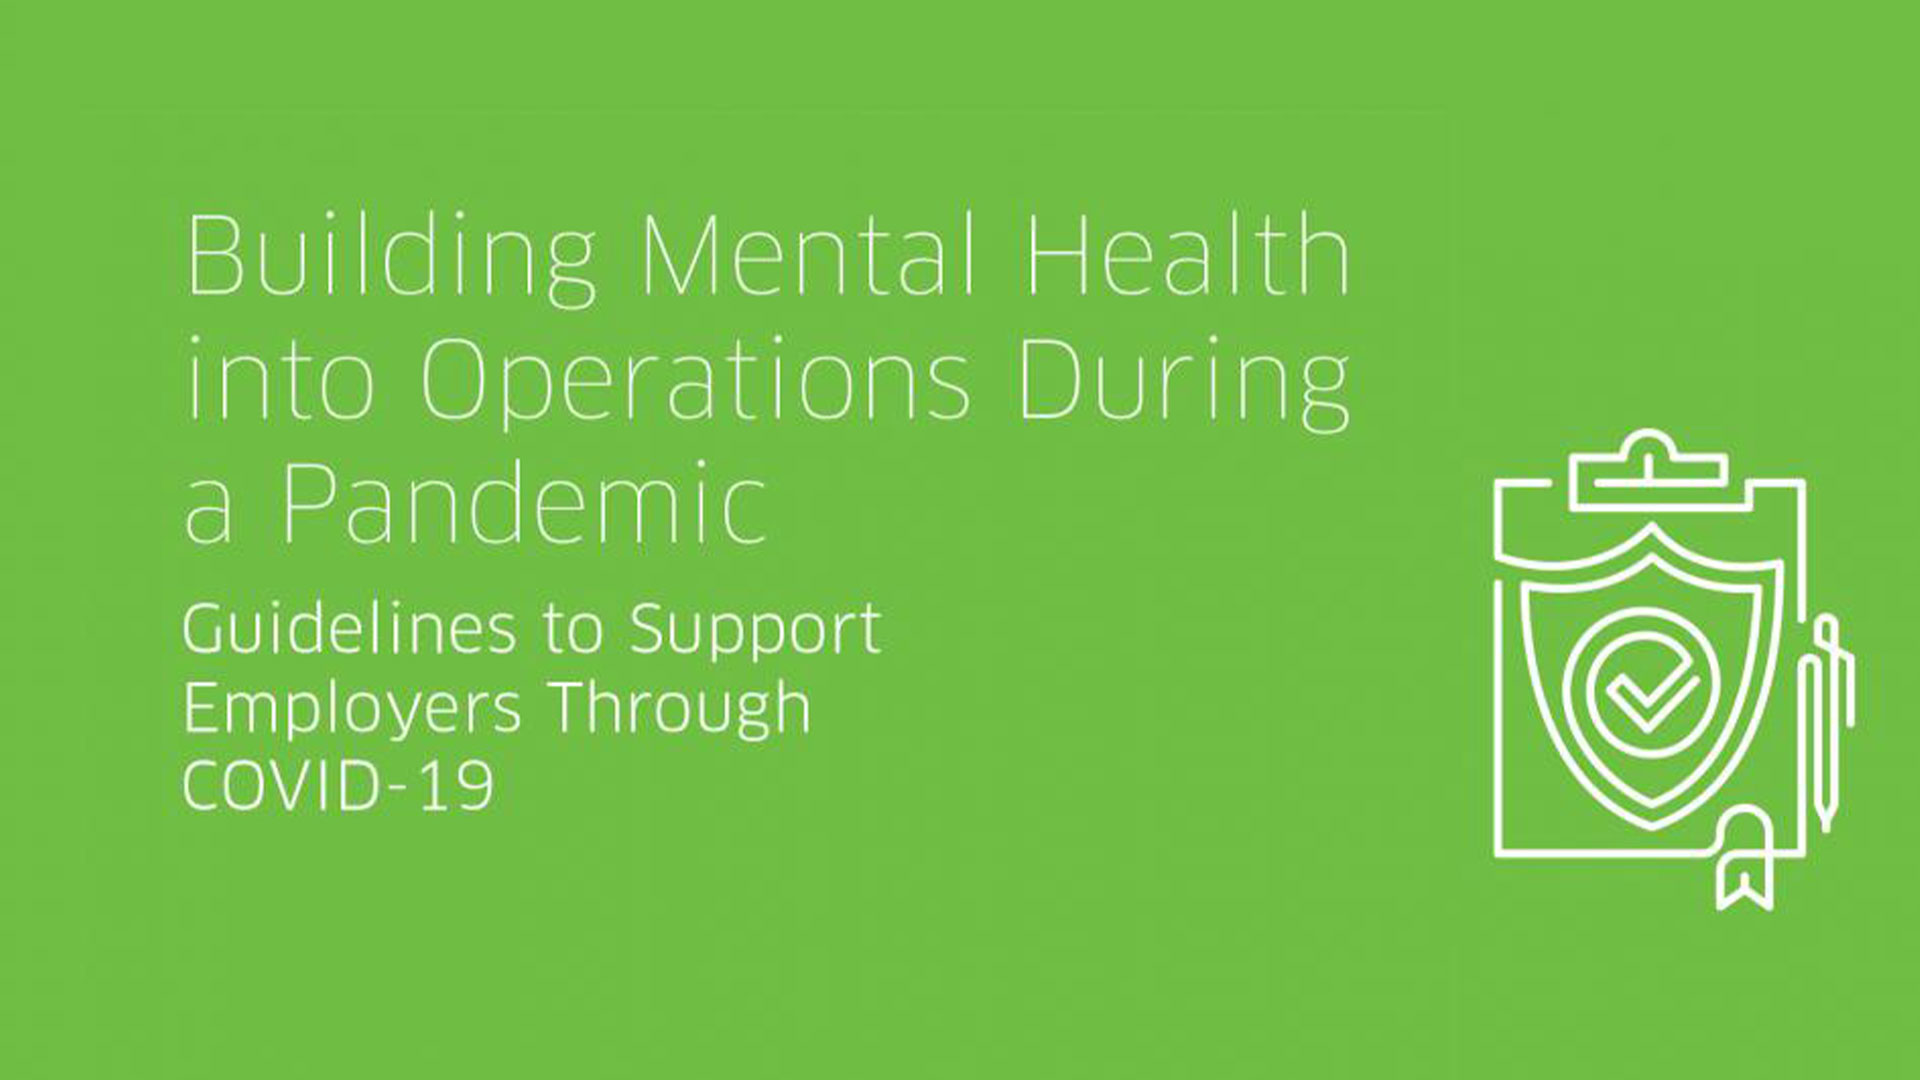 Guidelines for Building Mental Health into Operations During a Pandemic Slide 1